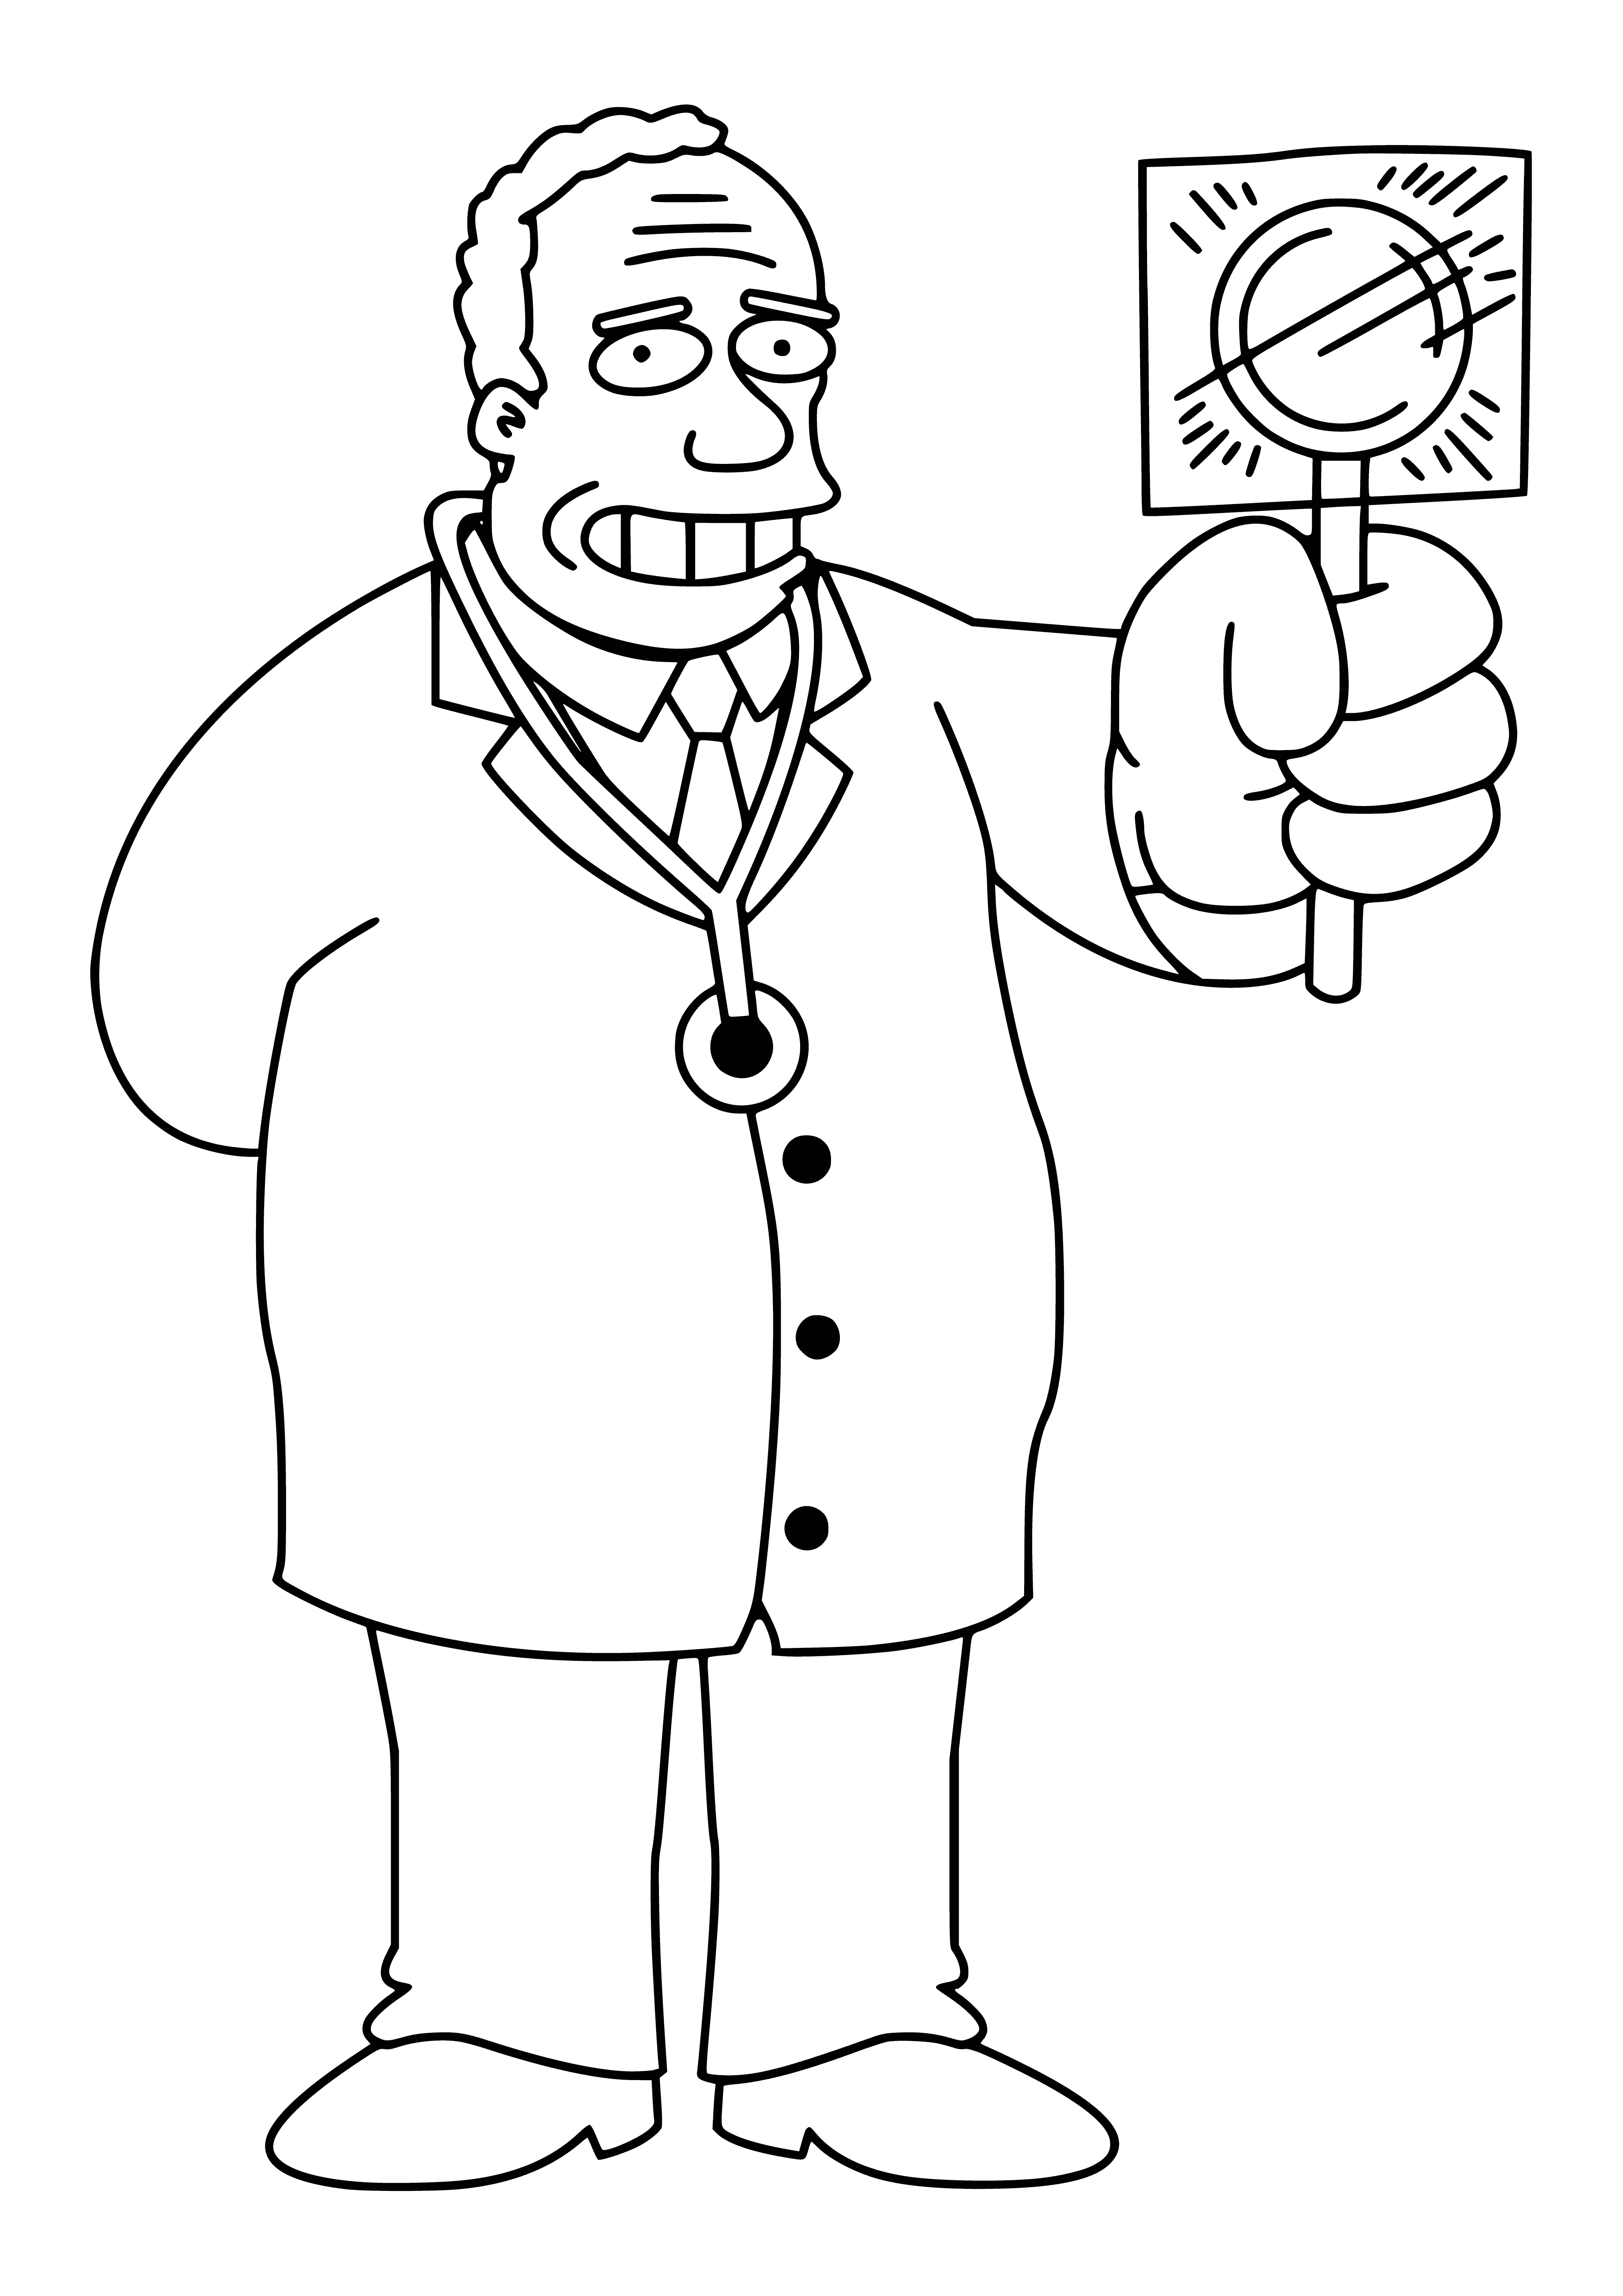 coloring page: Dr. Julius Hibbert, Springfield family doctor, stands among plants and smiles, wearing white coat and blue shirt, with black hair and mustache.